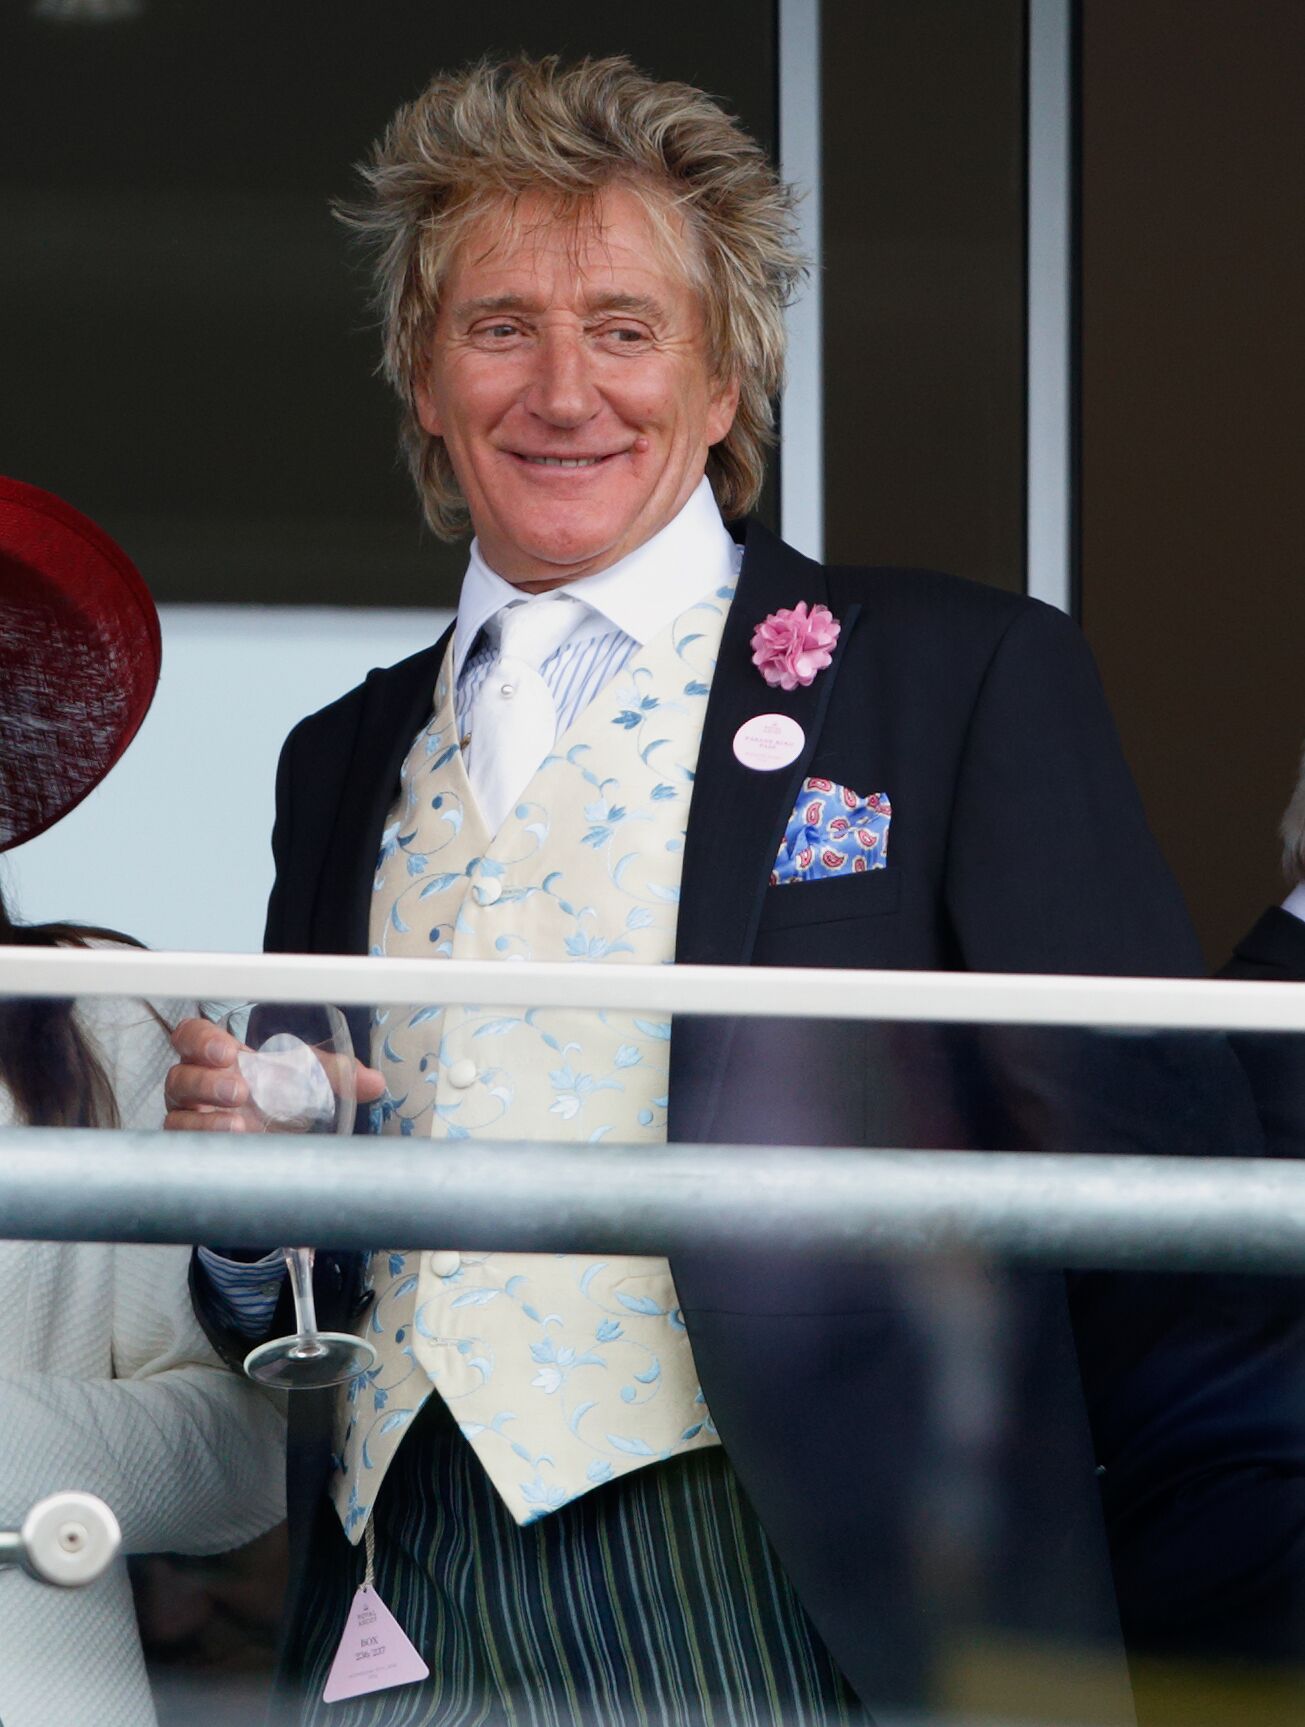 Sir Rod Stewart at the Royal Ascot at Ascot Racecourse in 2016 in England | Source: Getty Images